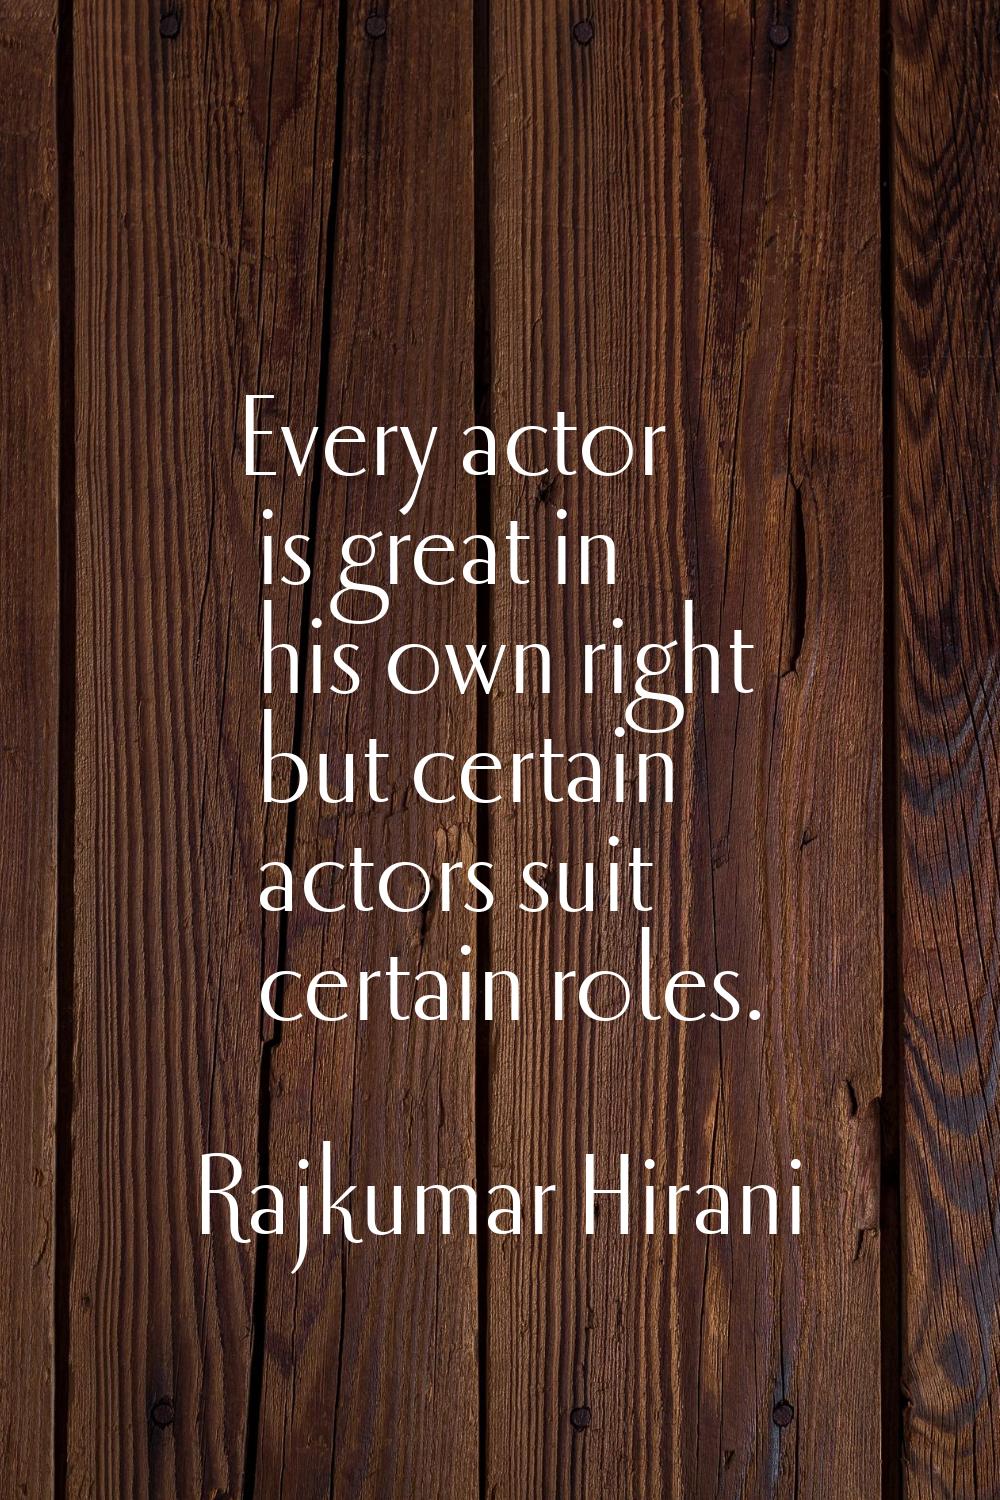 Every actor is great in his own right but certain actors suit certain roles.